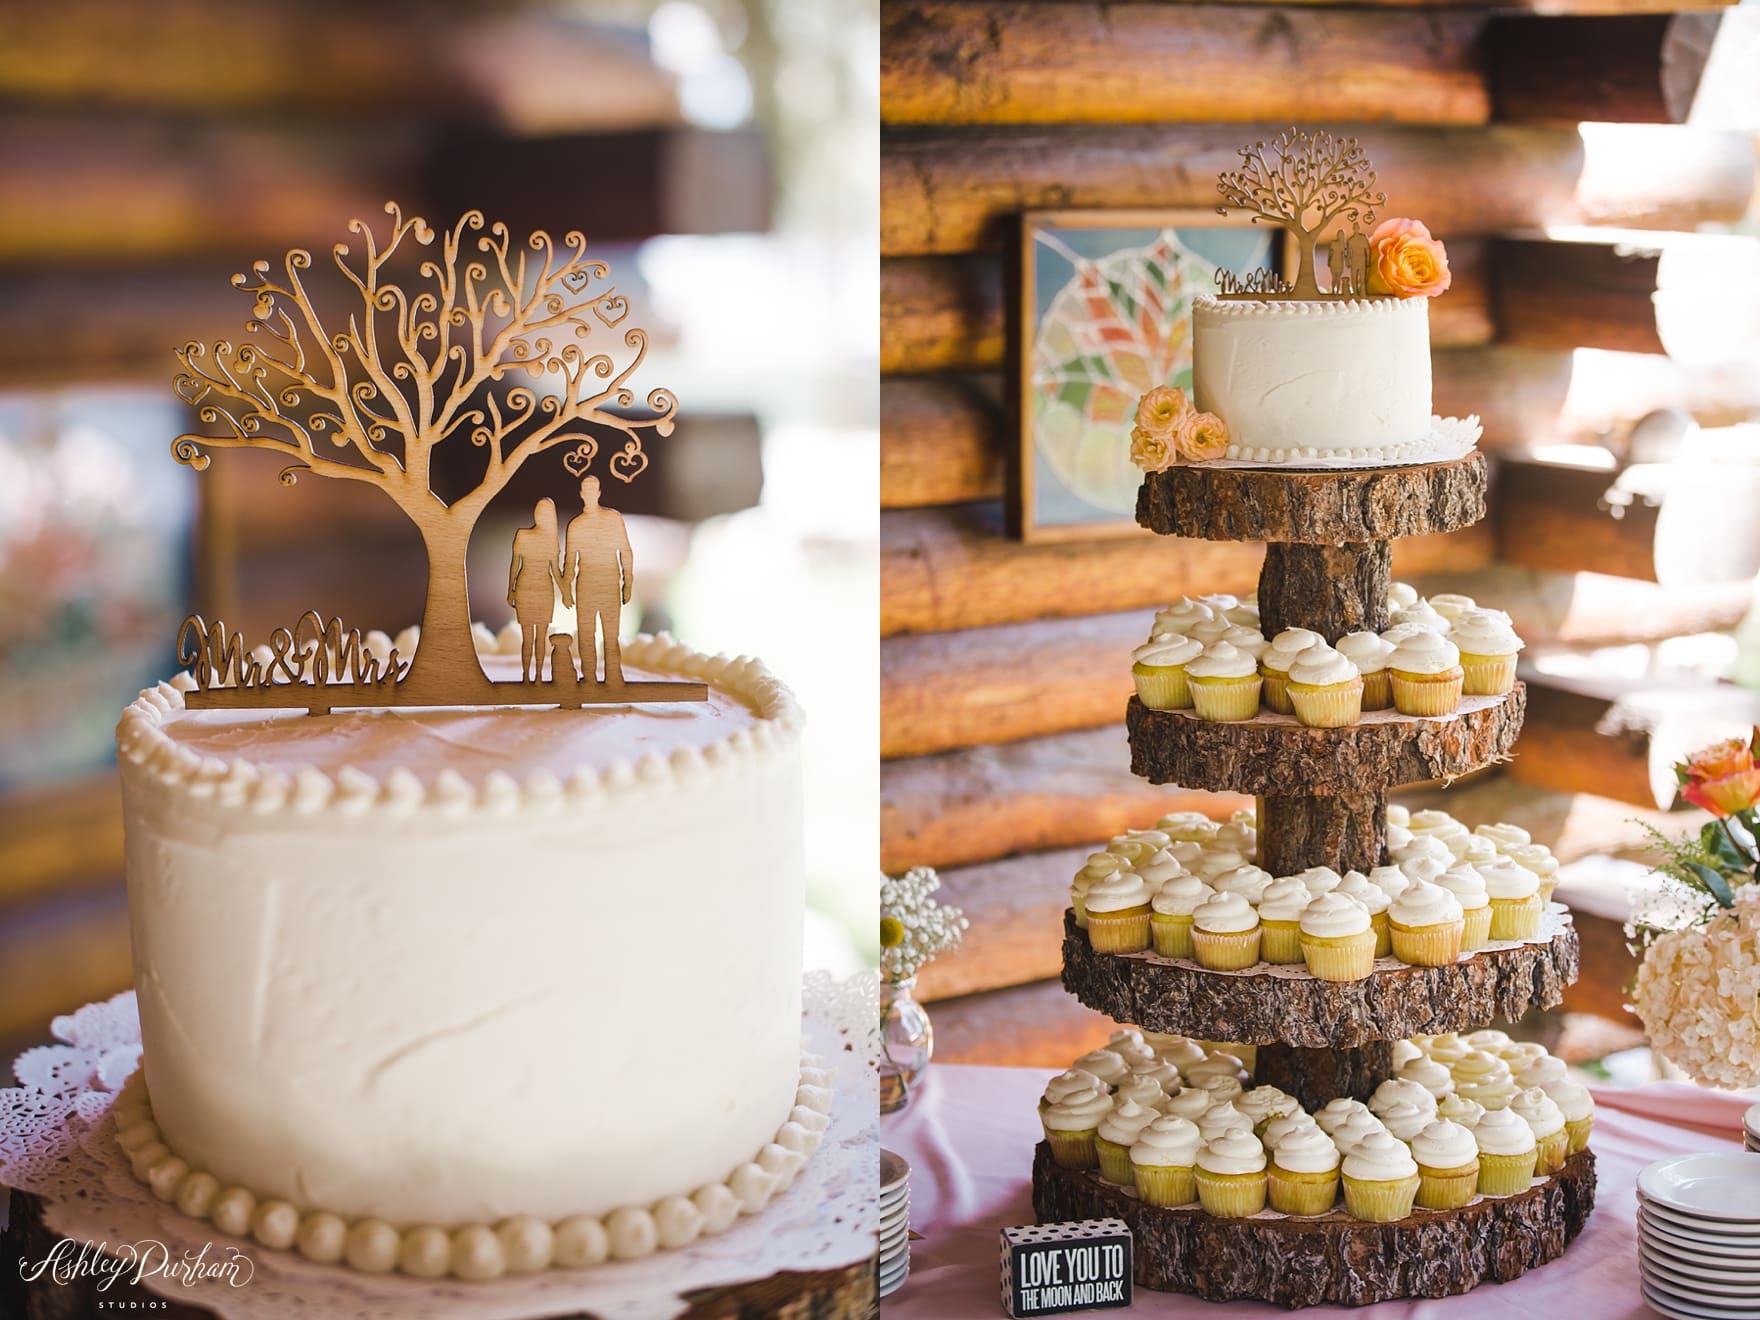 Inn at Fawnskin Wedding, Fawnksin Wedding, Big Bear Lake Wedding, cake cutting, lemon wedding cake, rustic wedding cake picture, cake stand made of wood, cake stand made from a tree